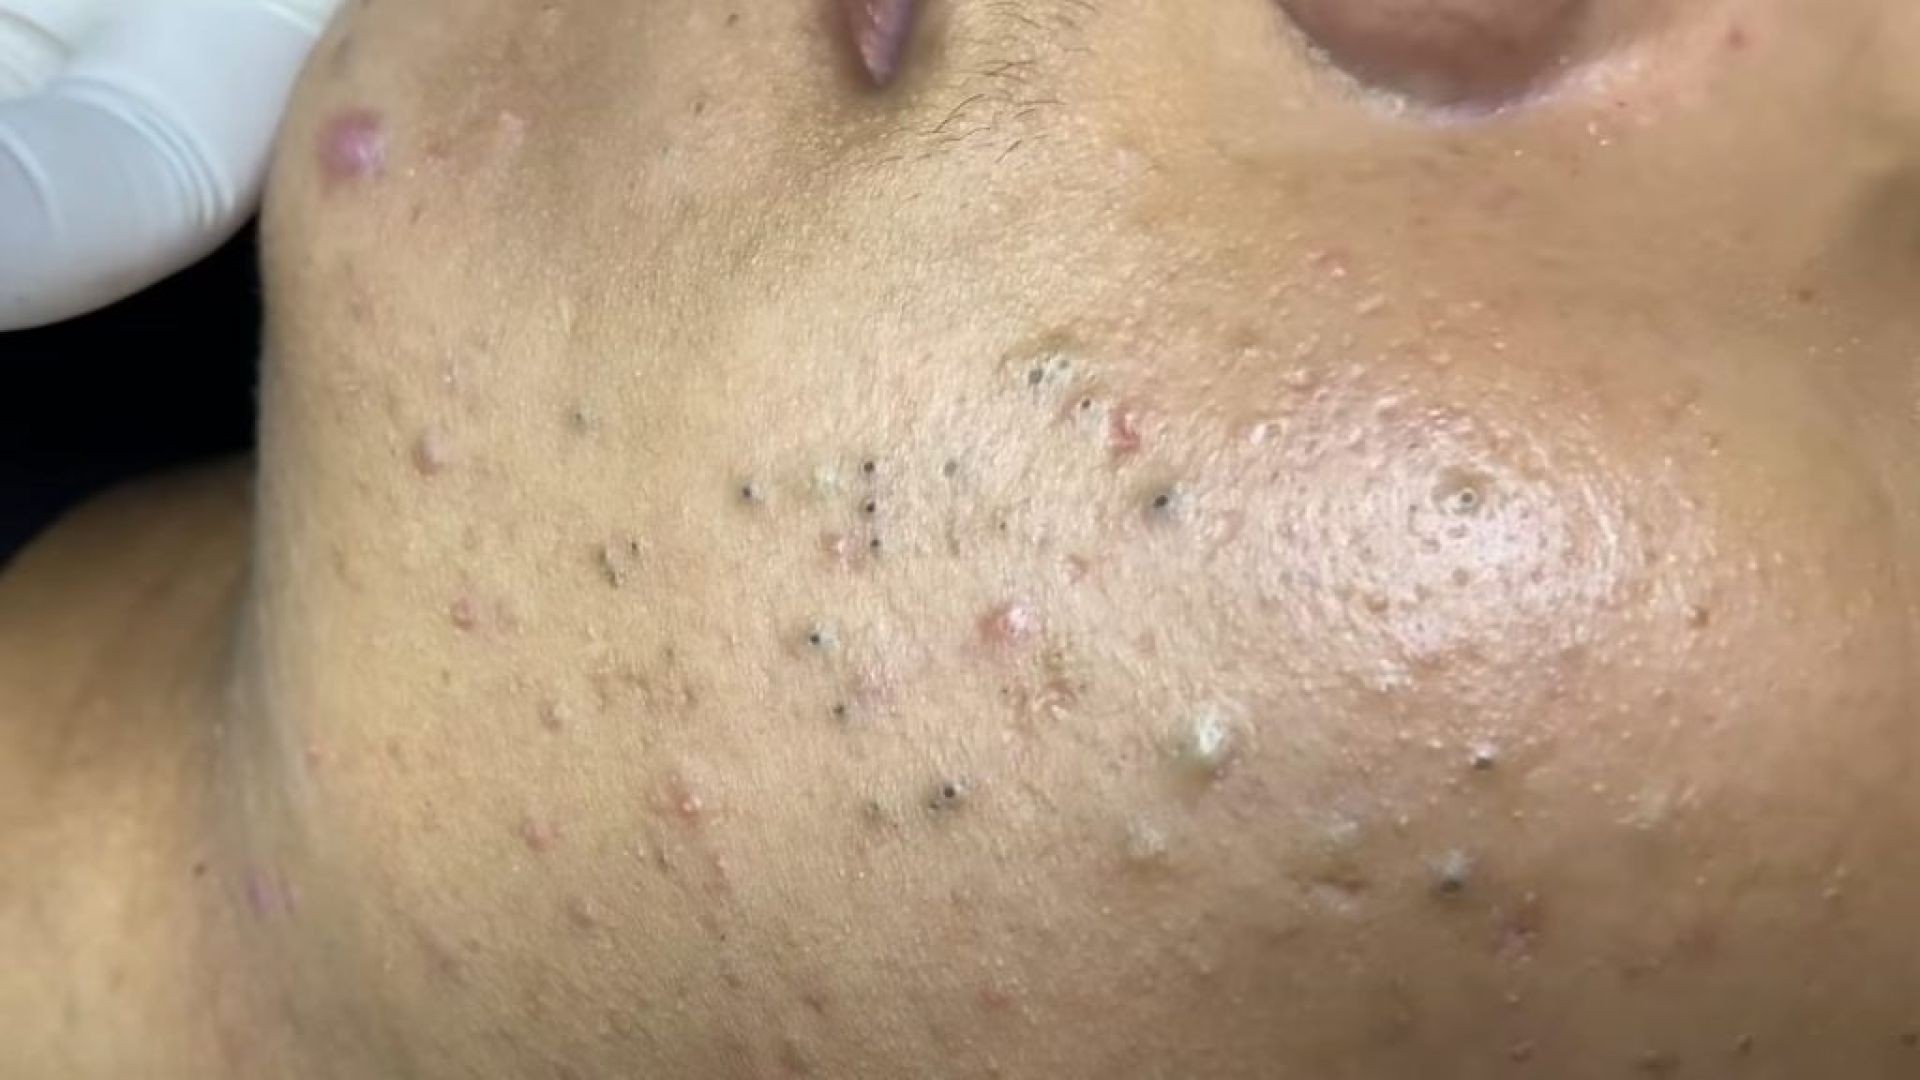 Blackhead Pimple.tv The Best Pimple Popping 2021 Videos You'll Find